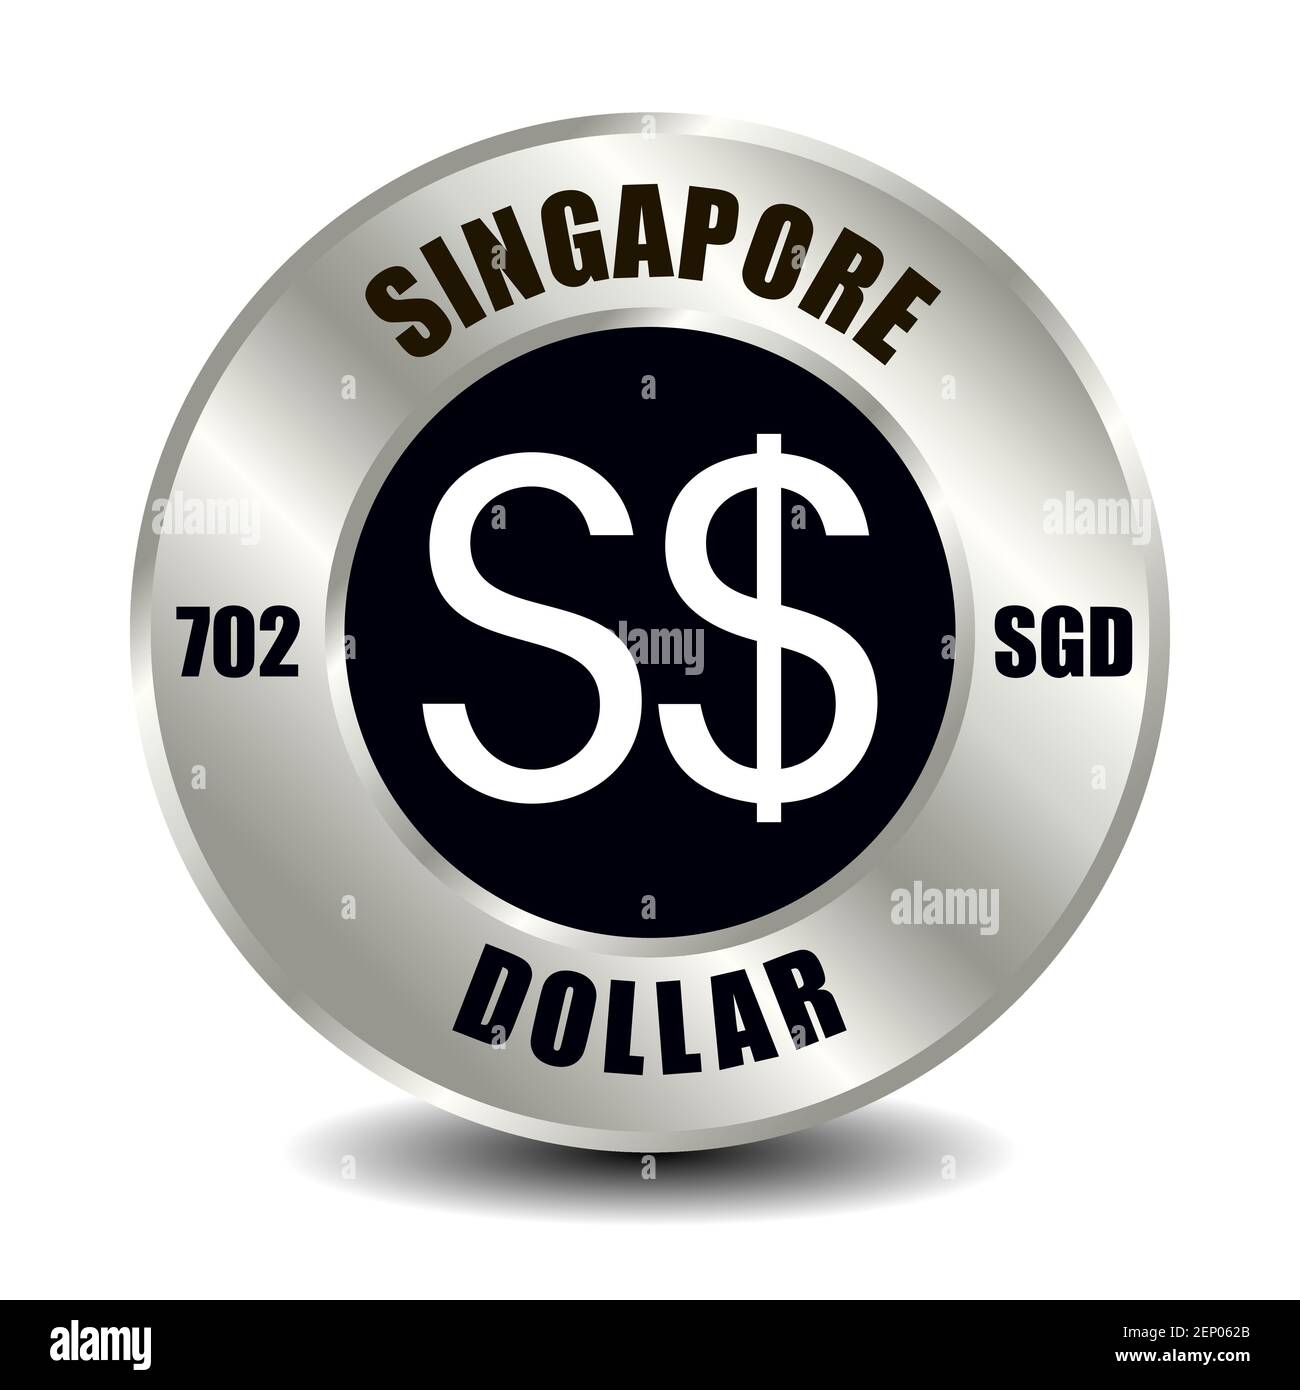 Singapore money icon isolated on round silver coin. Vector sign of currency symbol with international ISO code and abbreviation Stock Vector